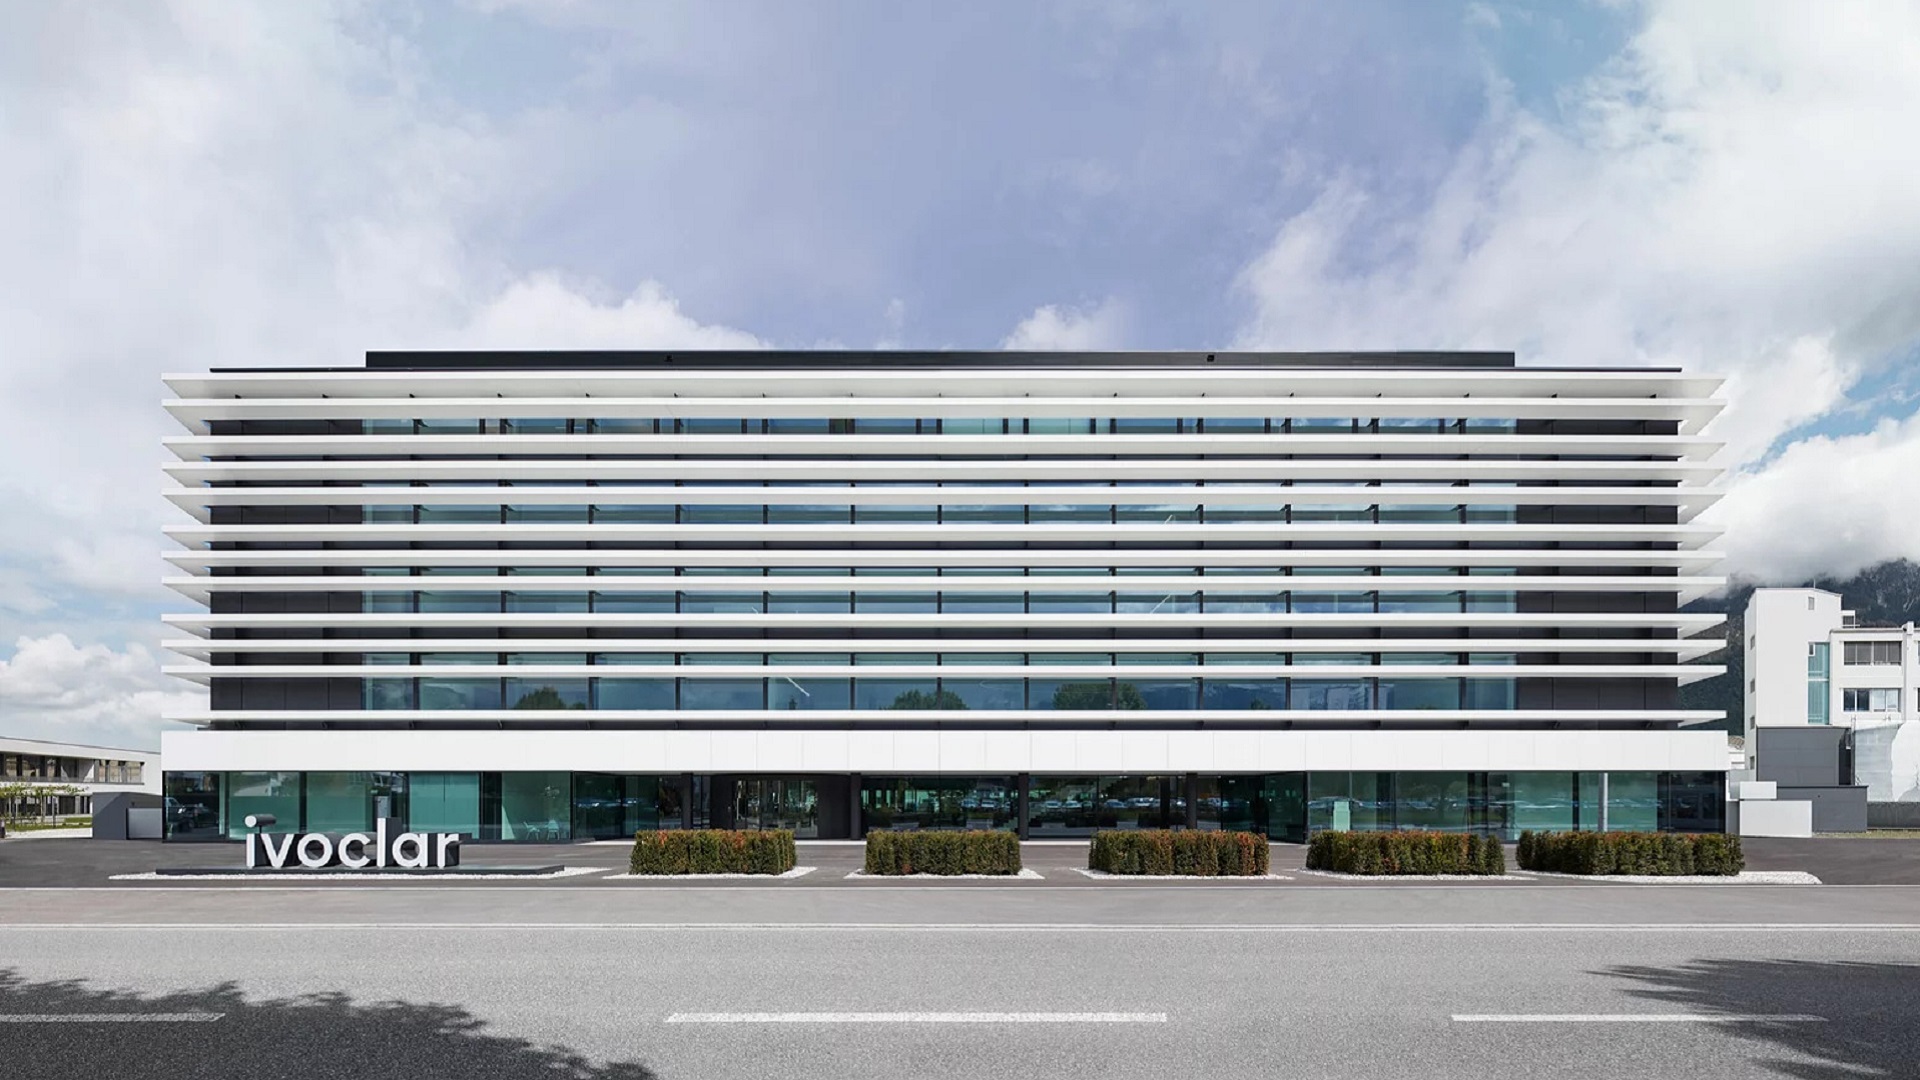 The new Ivoclar head office building features state-of-the-art working spaces and a company restaurant and is also home to the Ivoclar Academy and the interactive “Ivoclar Experience”. (Image: Ivoclar)